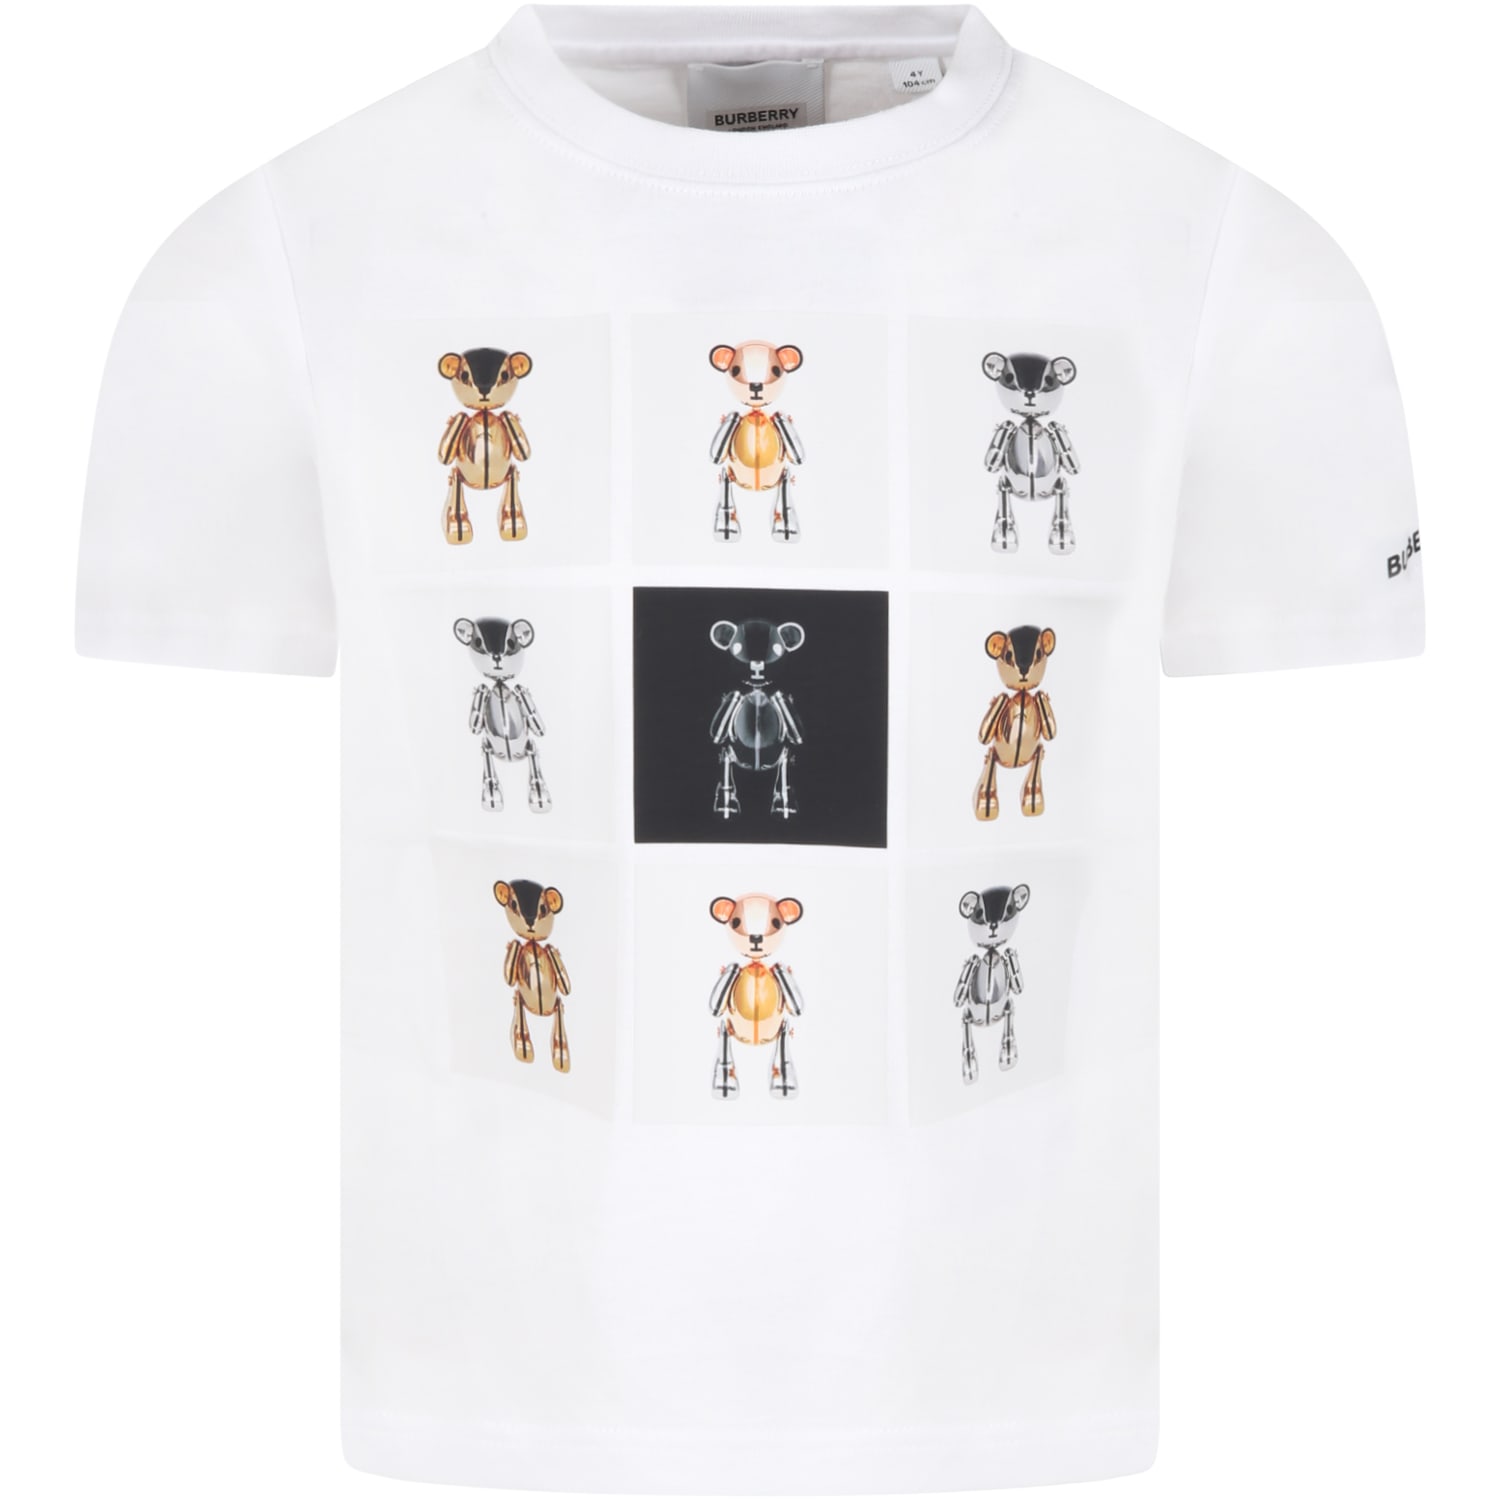 Burberry White T-shirt For Kids With Thomas Bear